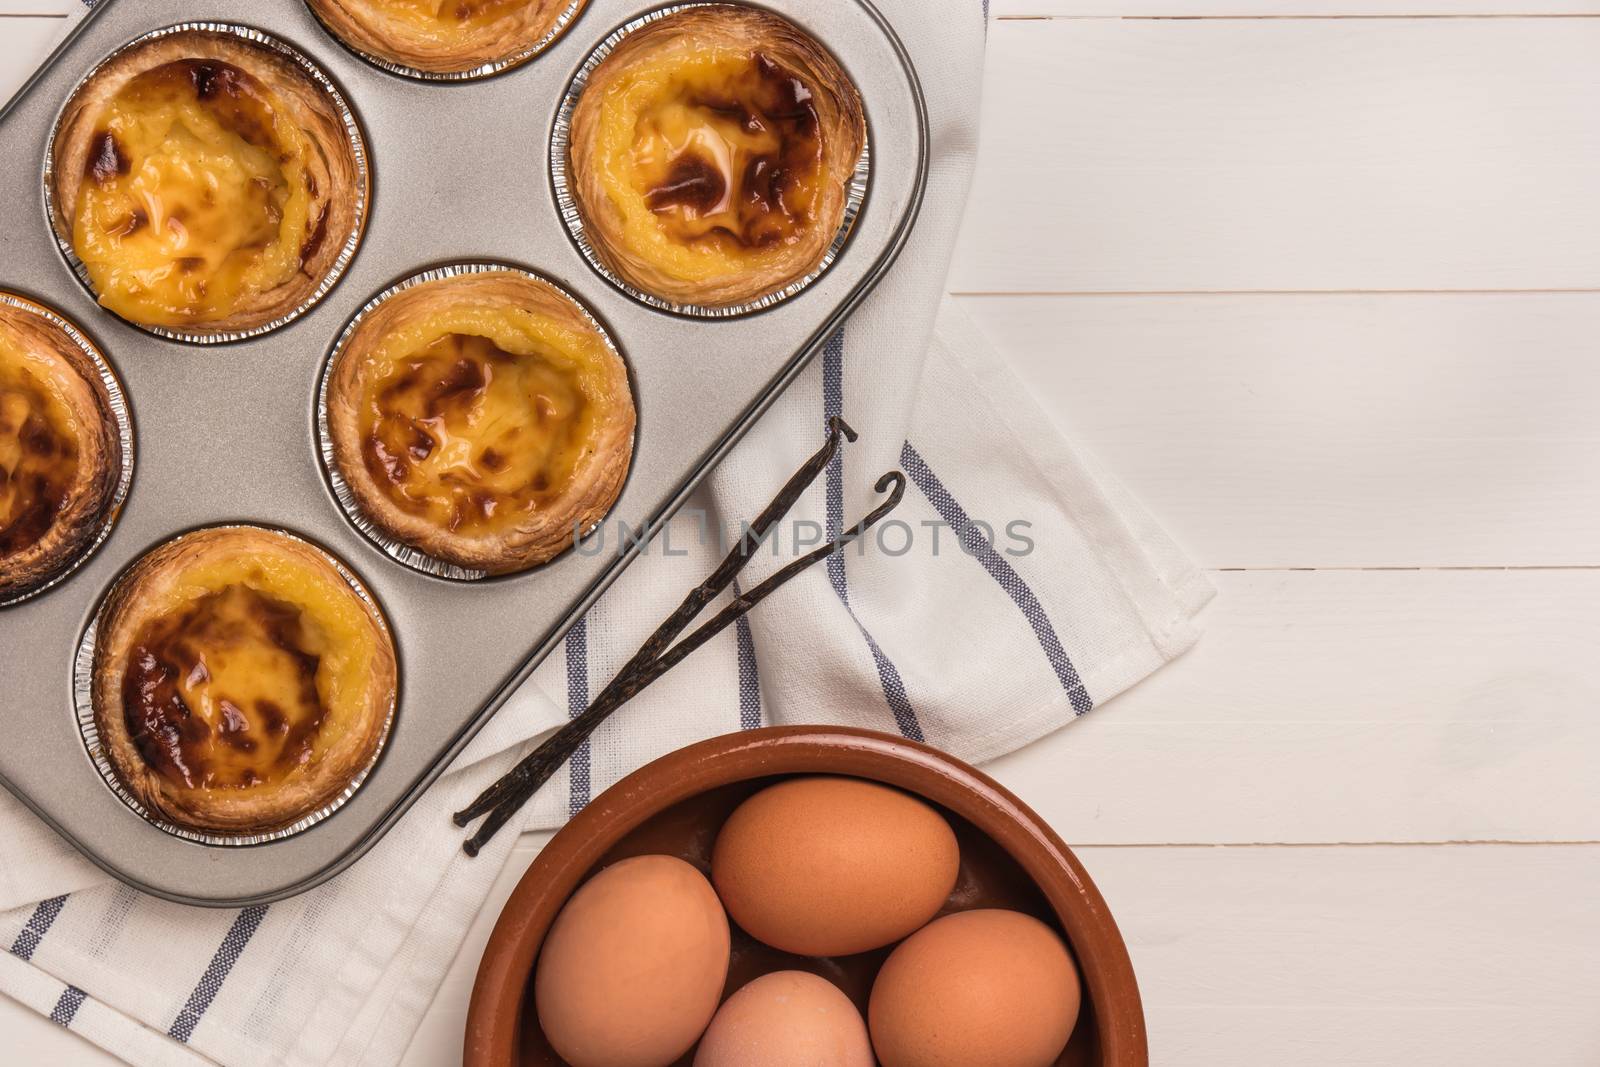 Pasteis de nata, typical Portuguese egg tart pastries from Lisbo by AnaMarques